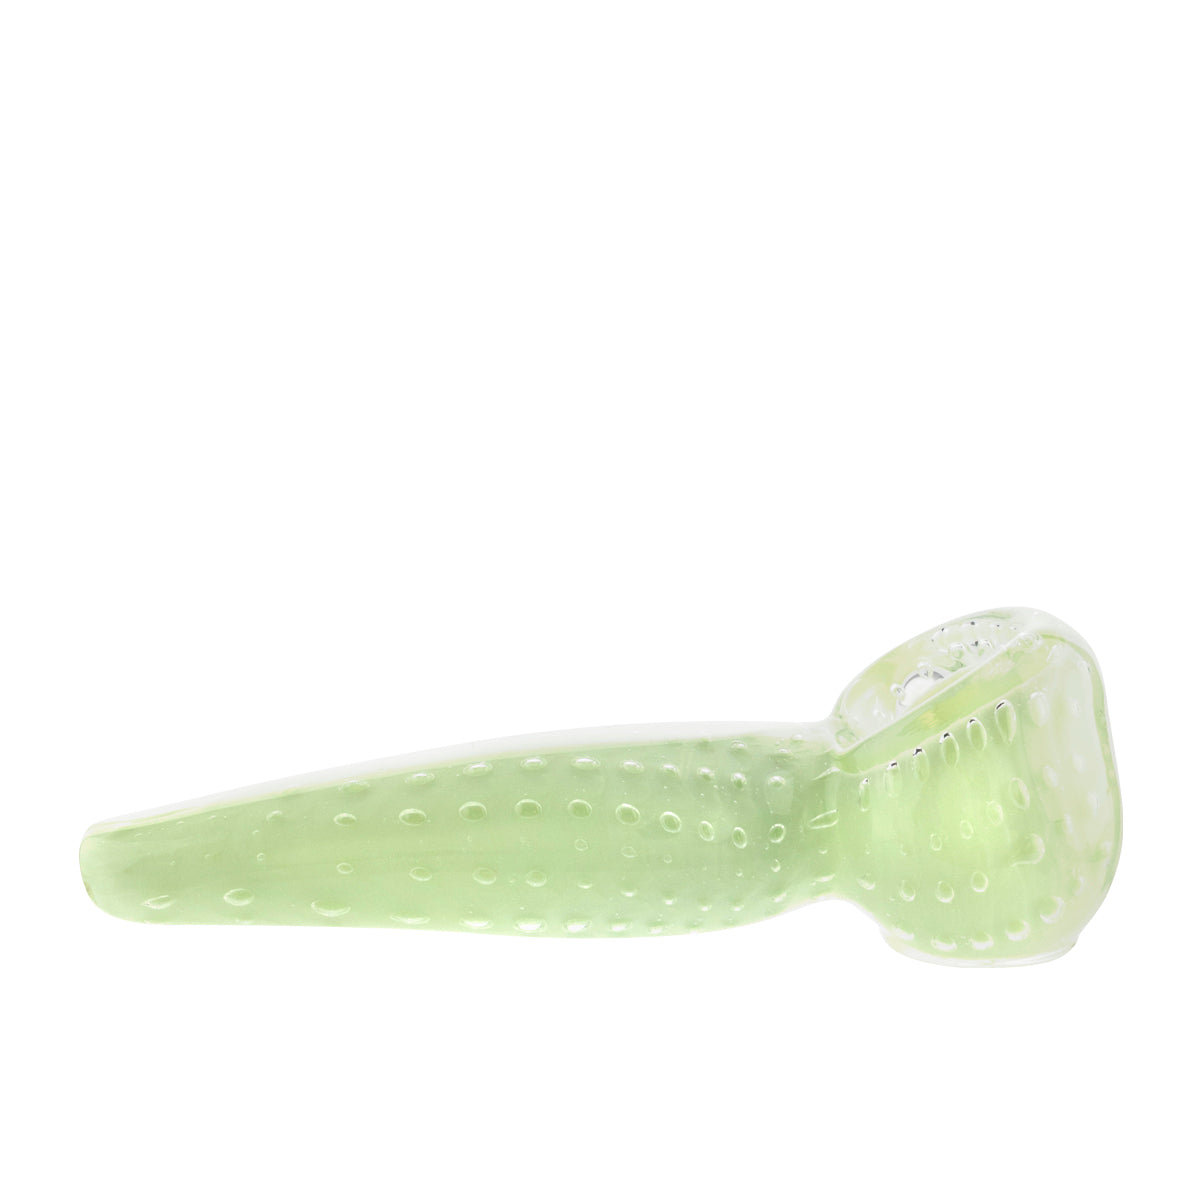 Hand Pipe | Tapered Mouth Tip | 5" - Glass Glass Hand Pipe Biohazard Inc   